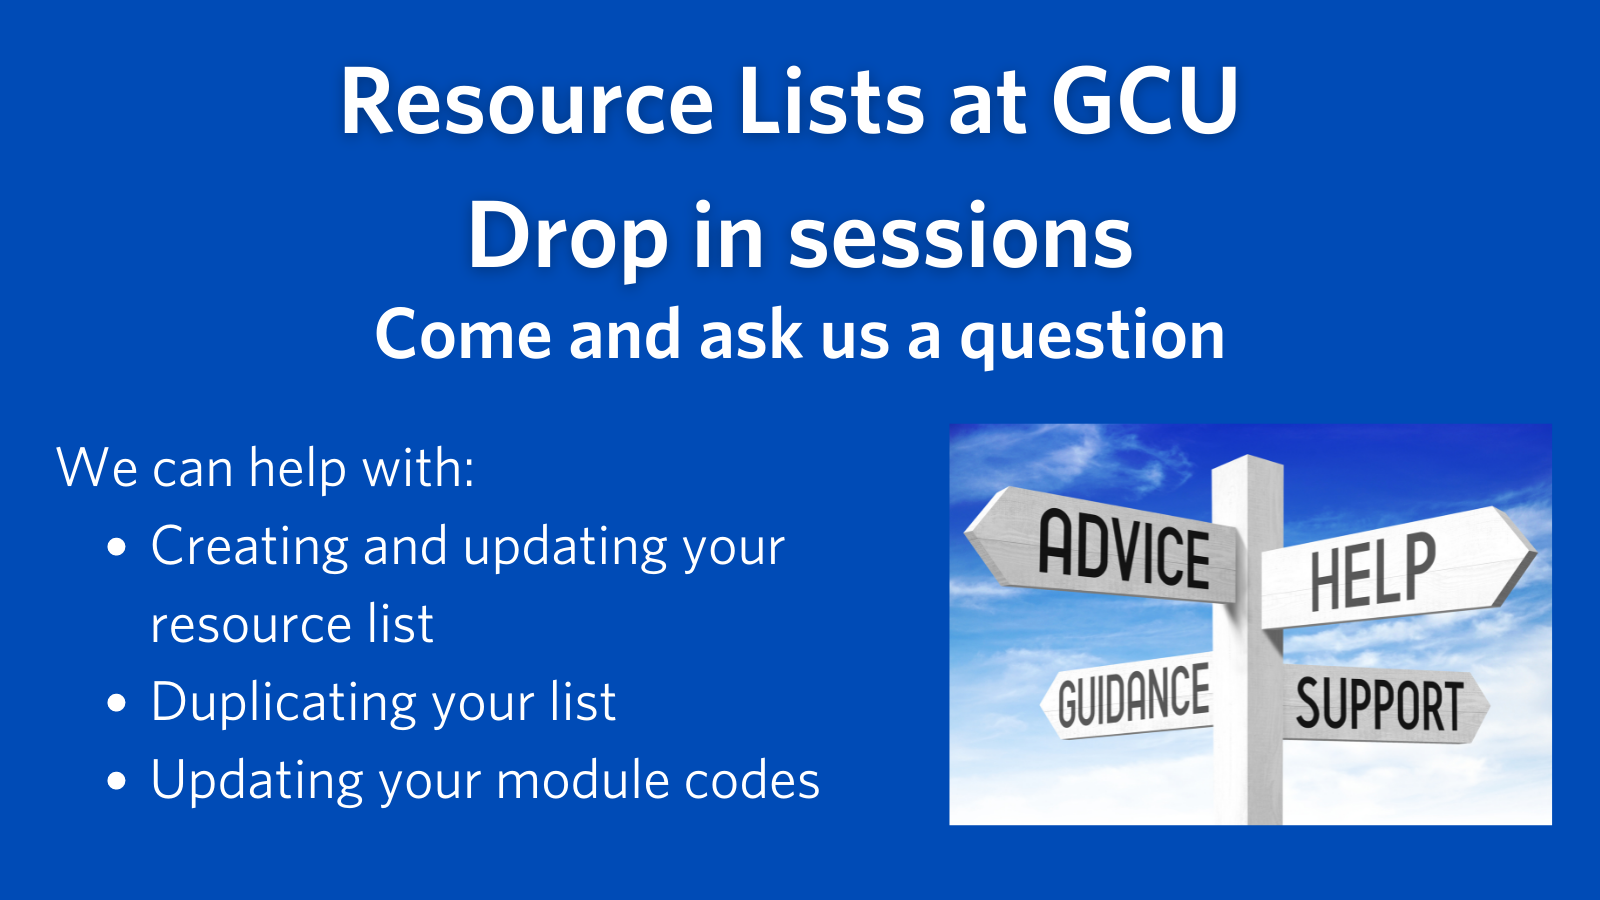 Resource Lists at GCU Drop in sessions, Come and ask us a question, We can help with: Creating and updating your resource list Duplicating your list Updating your module codes